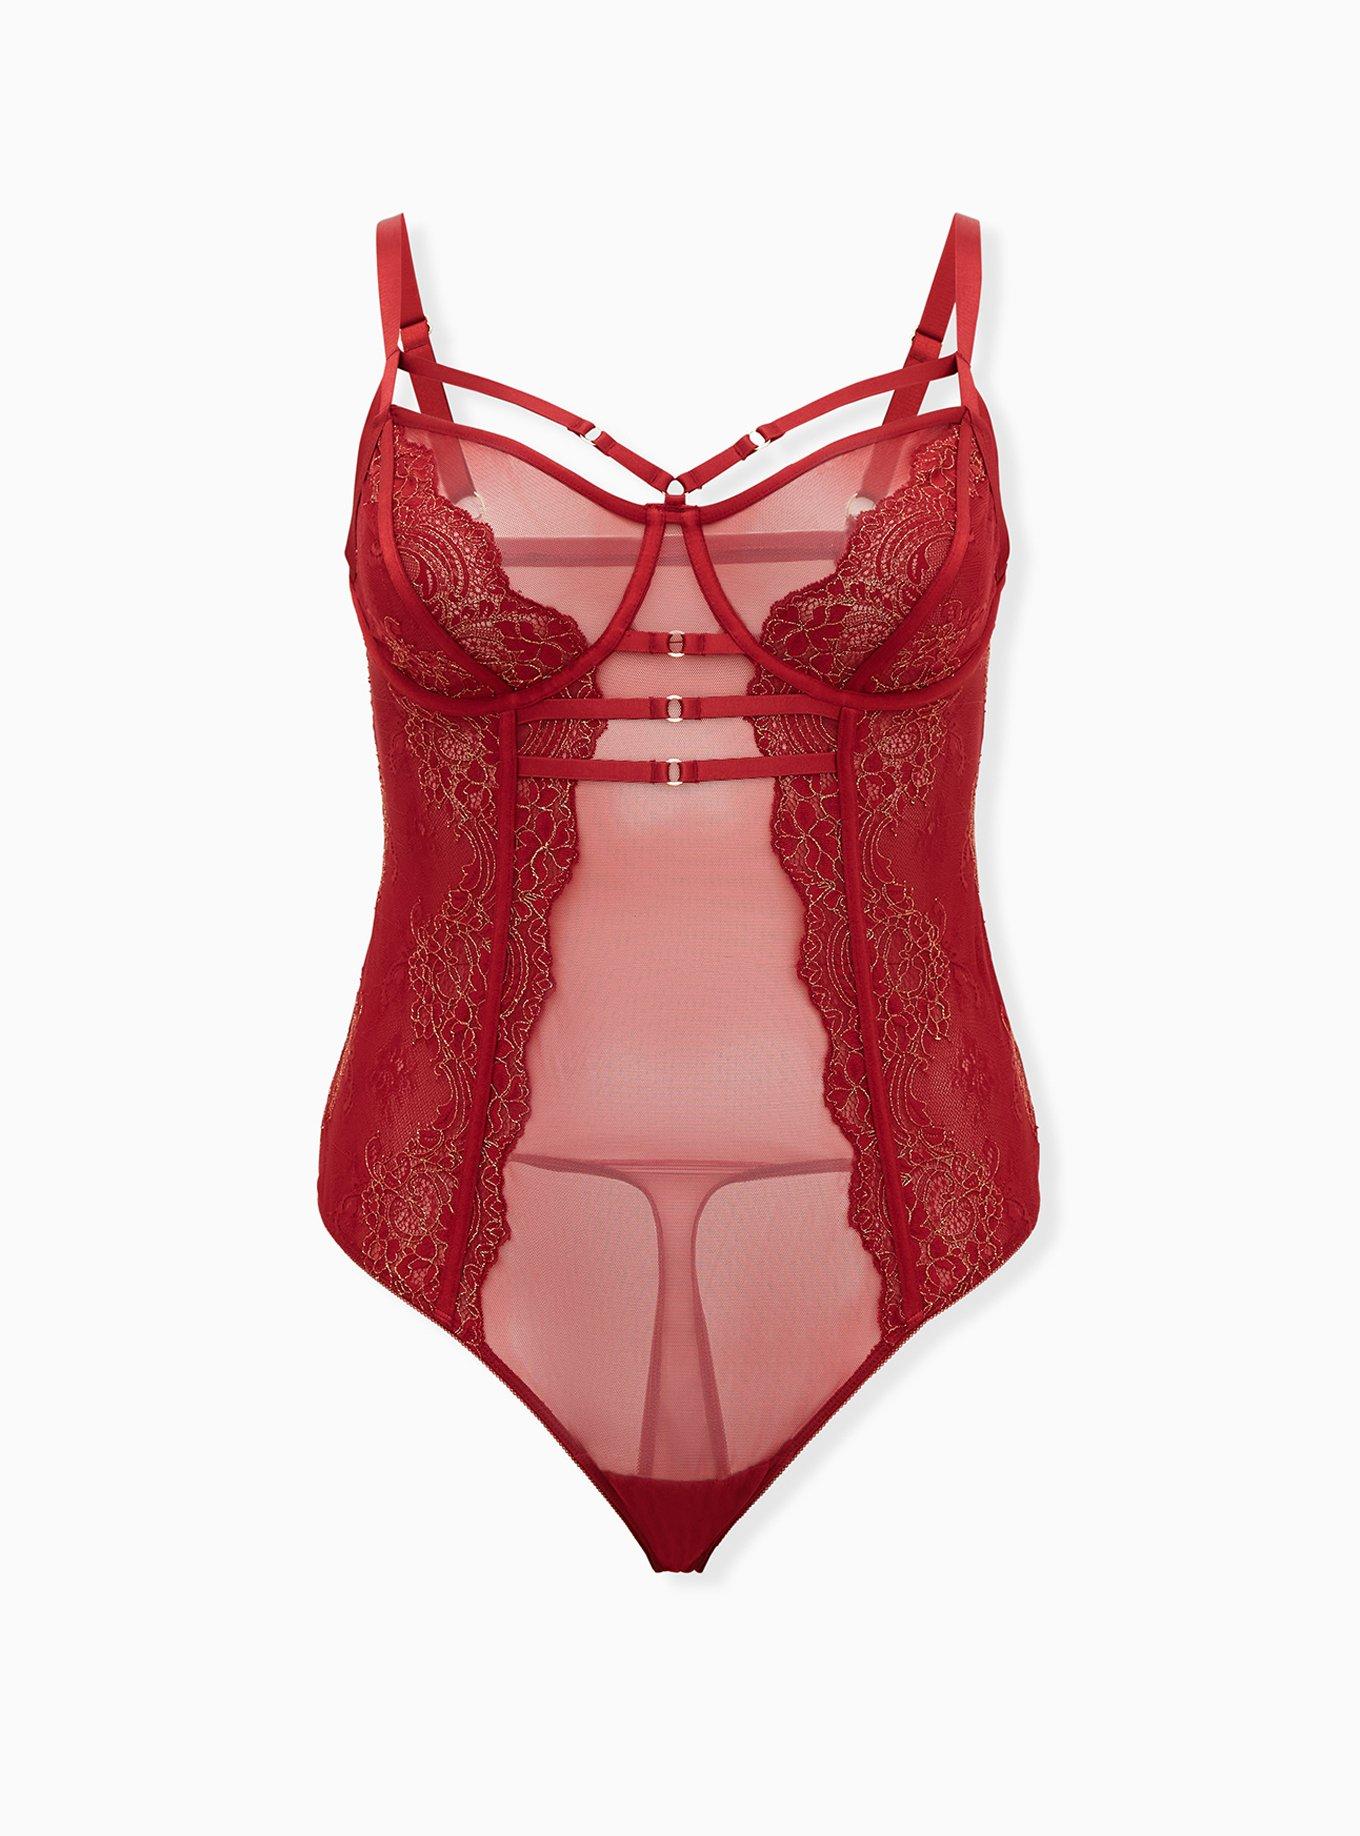 Plus Size - Red Mesh & Lace Harness Thong Bodysuit - Torrid